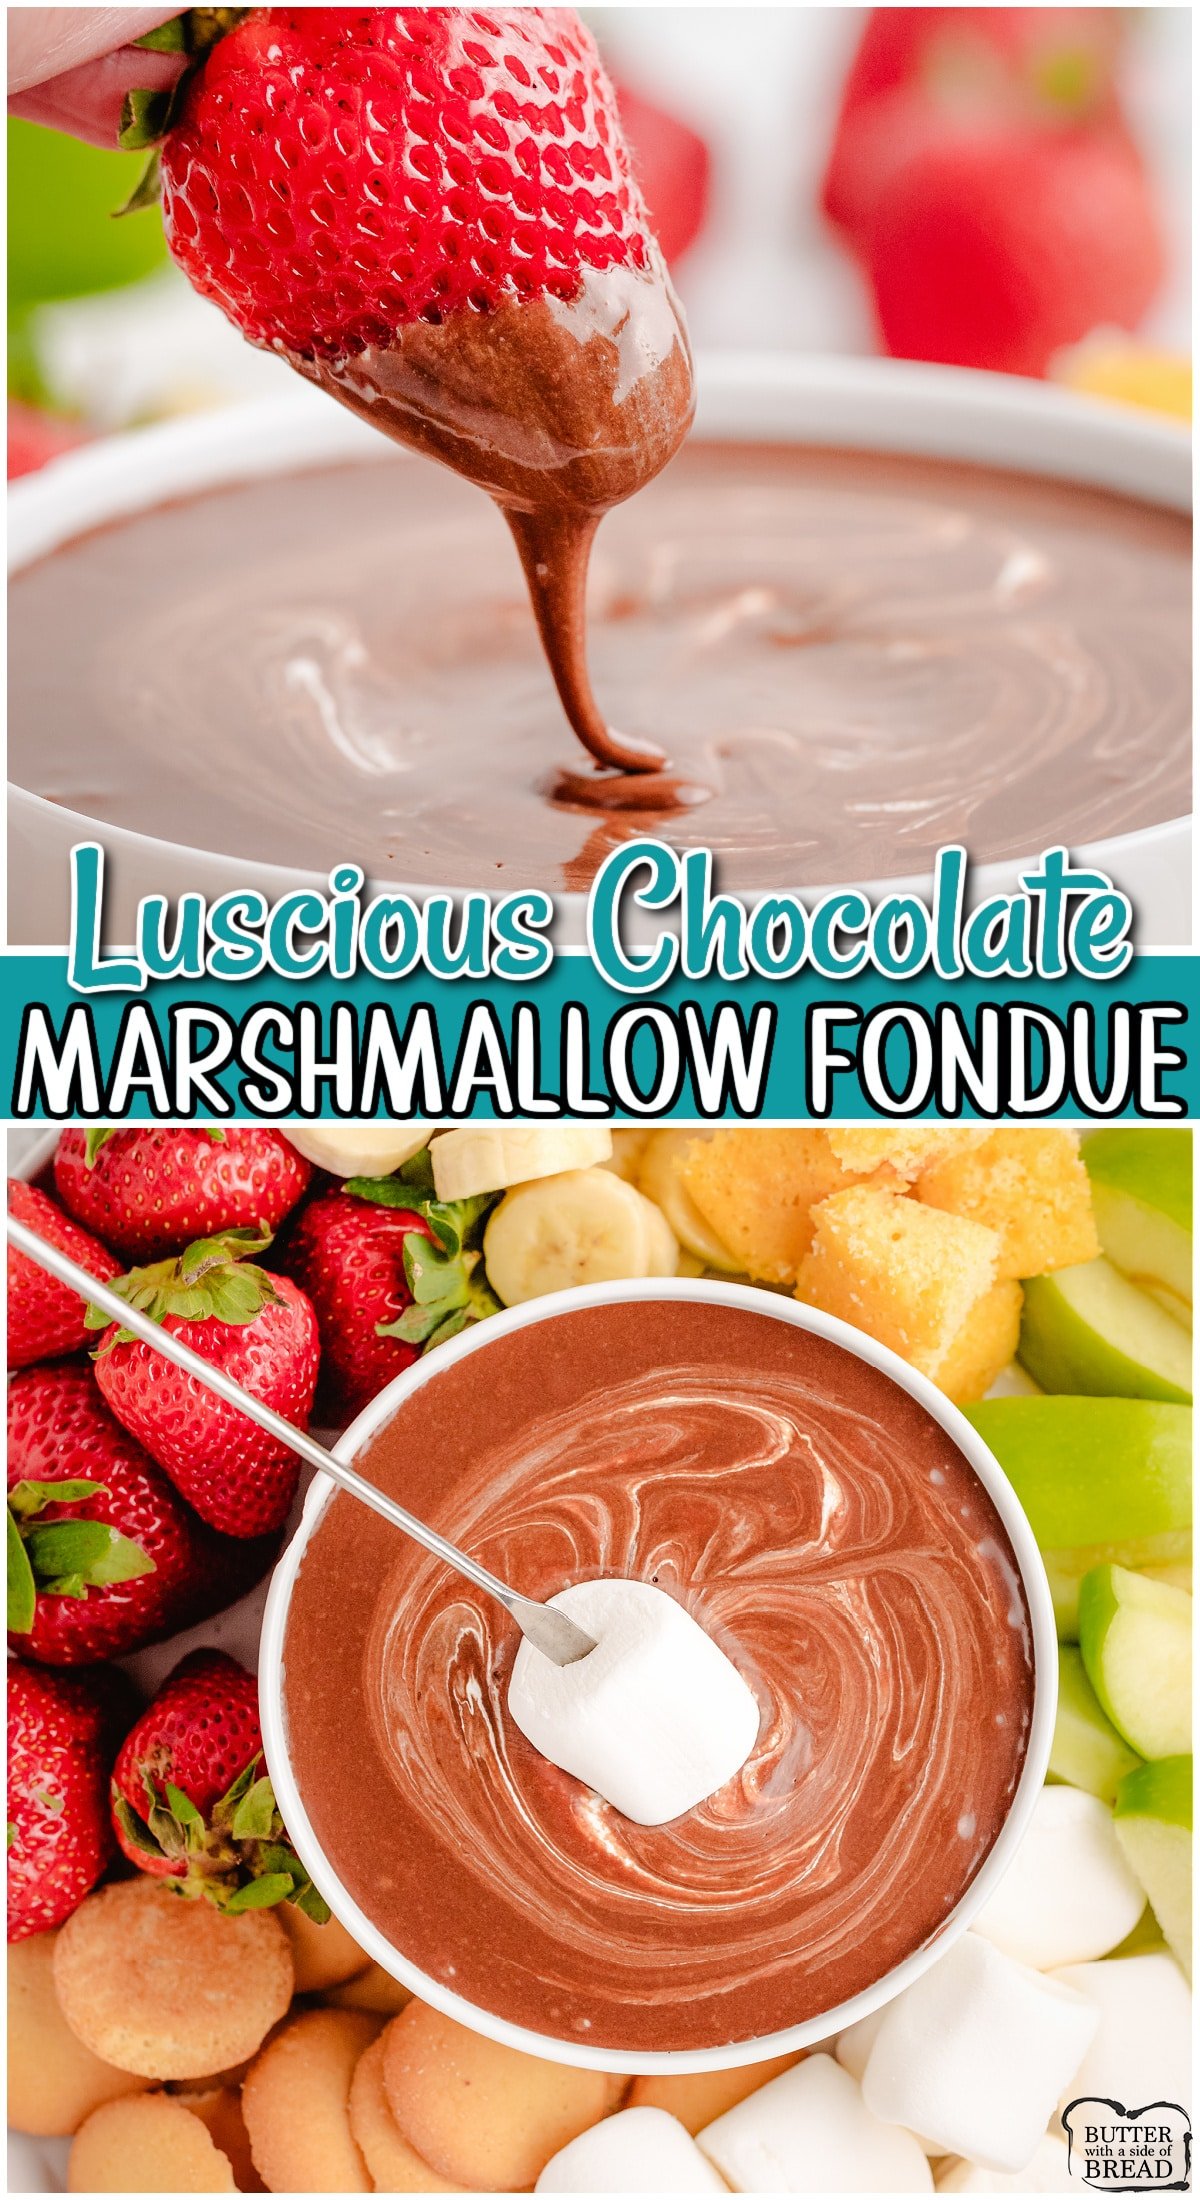 Easy 5 ingredient Chocolate Marshmallow Fondue recipe made with chocolate chips, condensed milk and marshmallow creme! Amazing dessert fondue for dipping fresh fruit! 